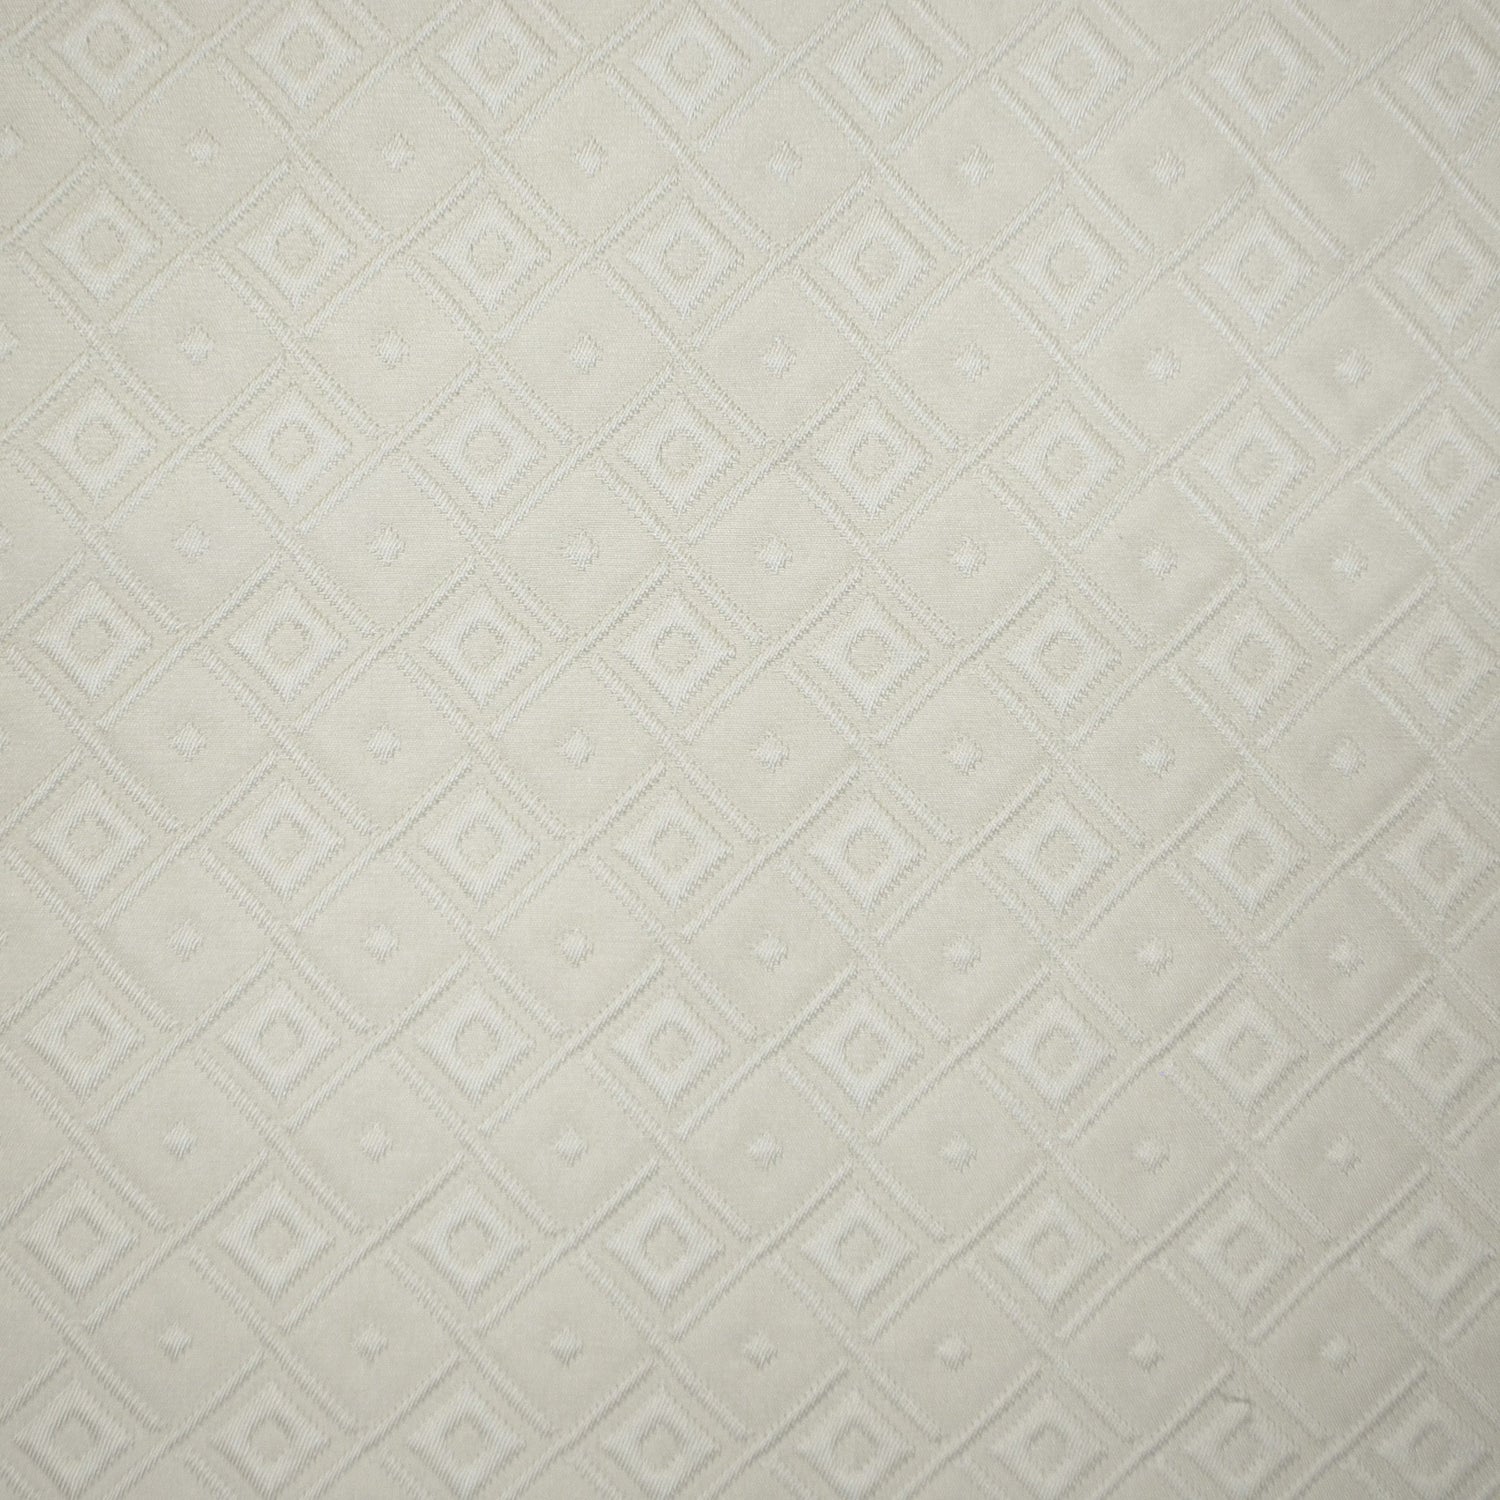 Harrison House fabric in cream color - pattern number VW 0004LASS - by Scalamandre in the Old World Weavers collection